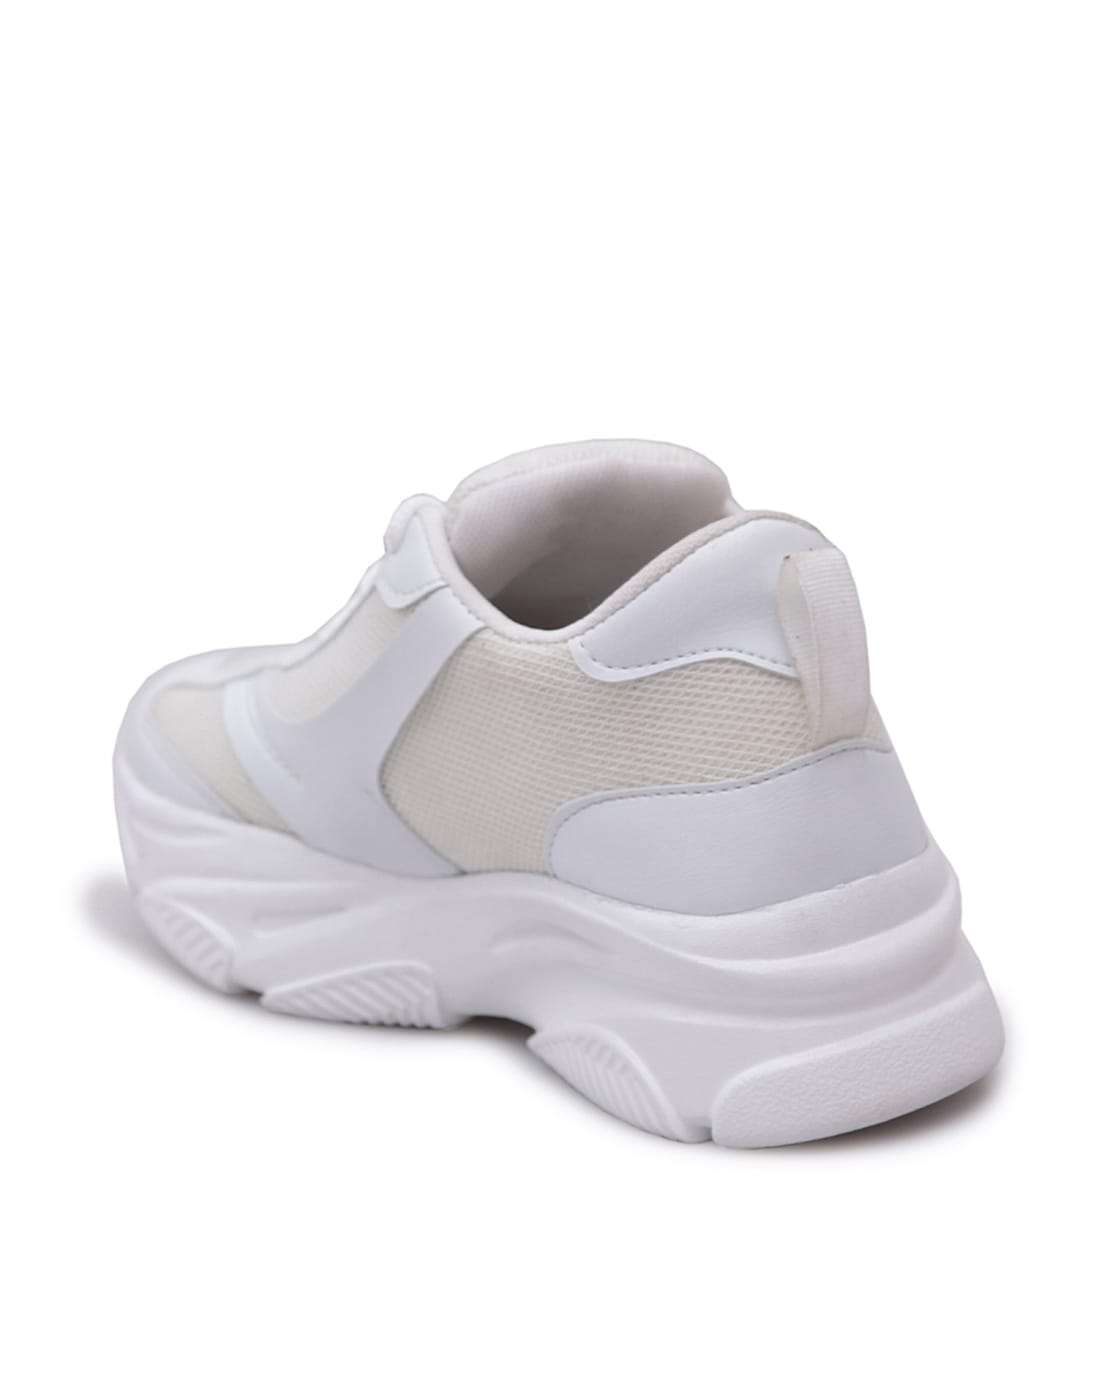 Buy Longwalk Women's Solid Low-Top Sneaker Shoes (White, Numeric_3) at  Amazon.in